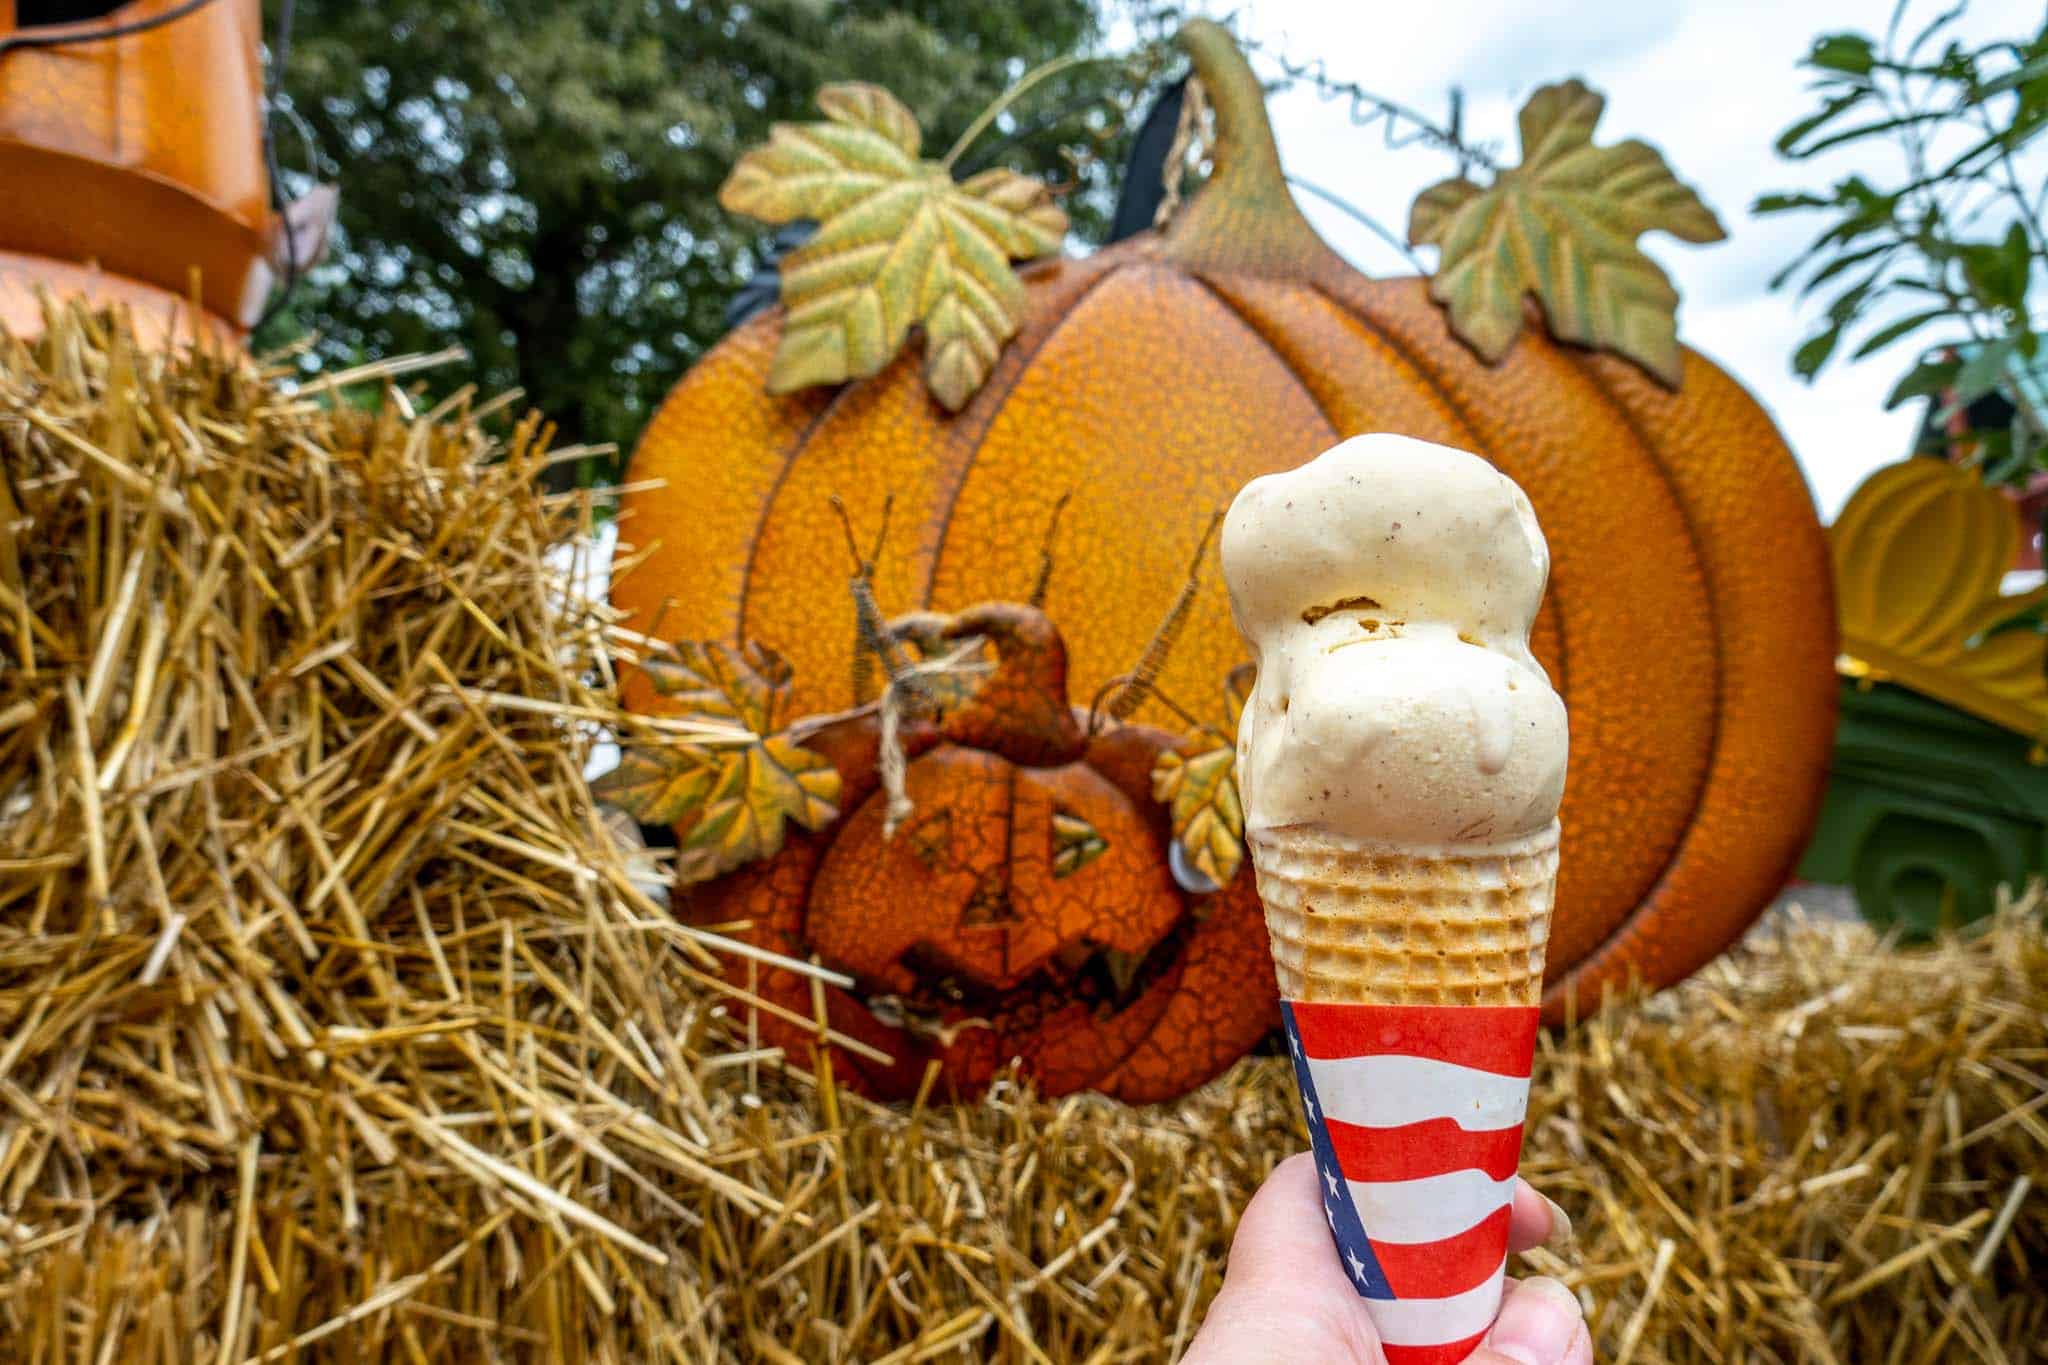 Ice cream cone held up in front of a metal pumpkin decoration sitting on a hay bale